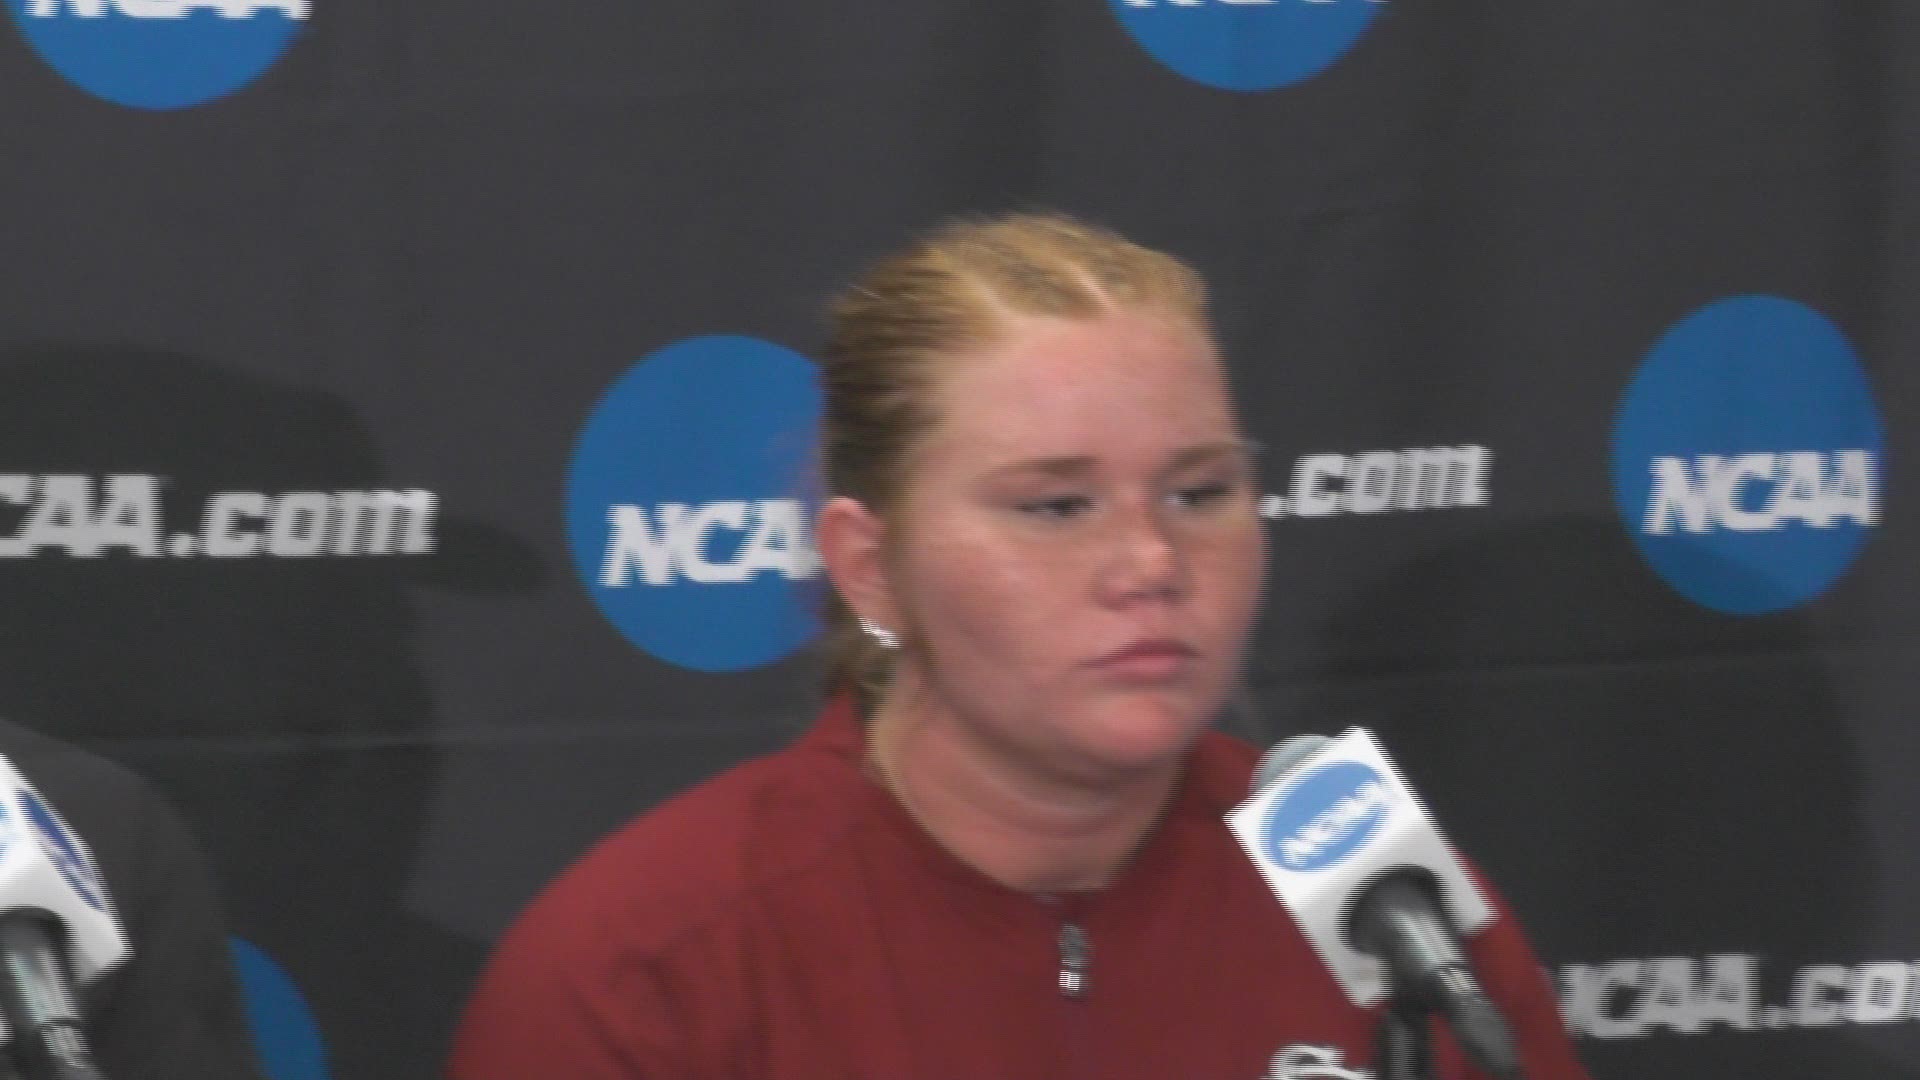 The Gamecocks shutout Liberty 5-0 in the Columbia Region championship to advance to the NCAA Super Regional for the first time since 2007. Pitchers Dixie Raley, Cayla Drotar and head coach Beverly Smith talk about winning the Region they hosted and moving